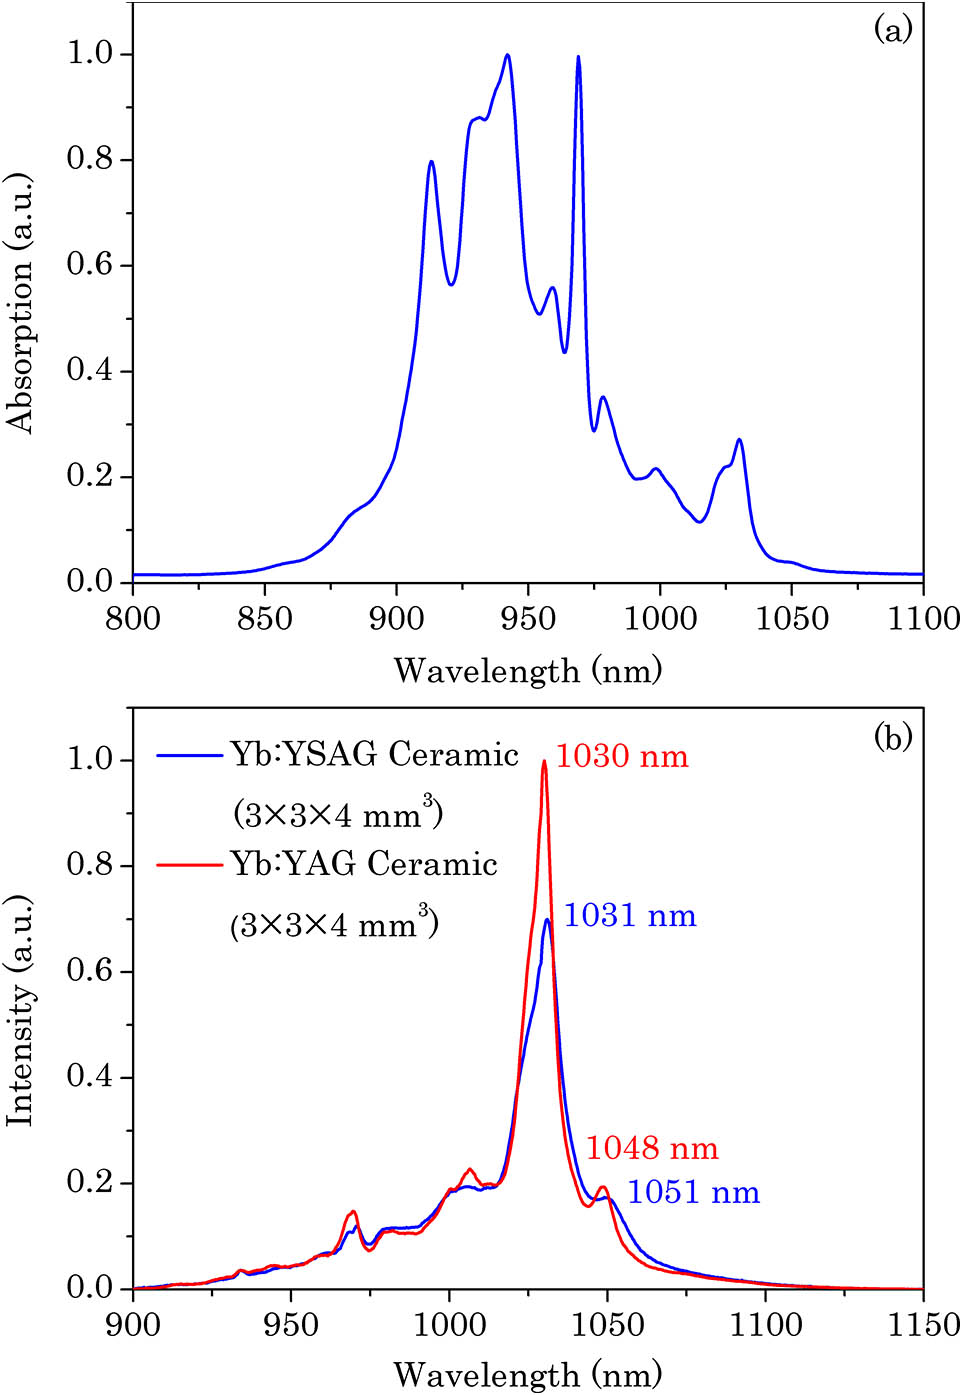 (Color online) (a) Absorption spectrum of a 10 at.% Yb:YSAG ceramic at room temperature and (b) emission spectra of 10 at.% Yb:YSAG and Yb:YAG ceramics.